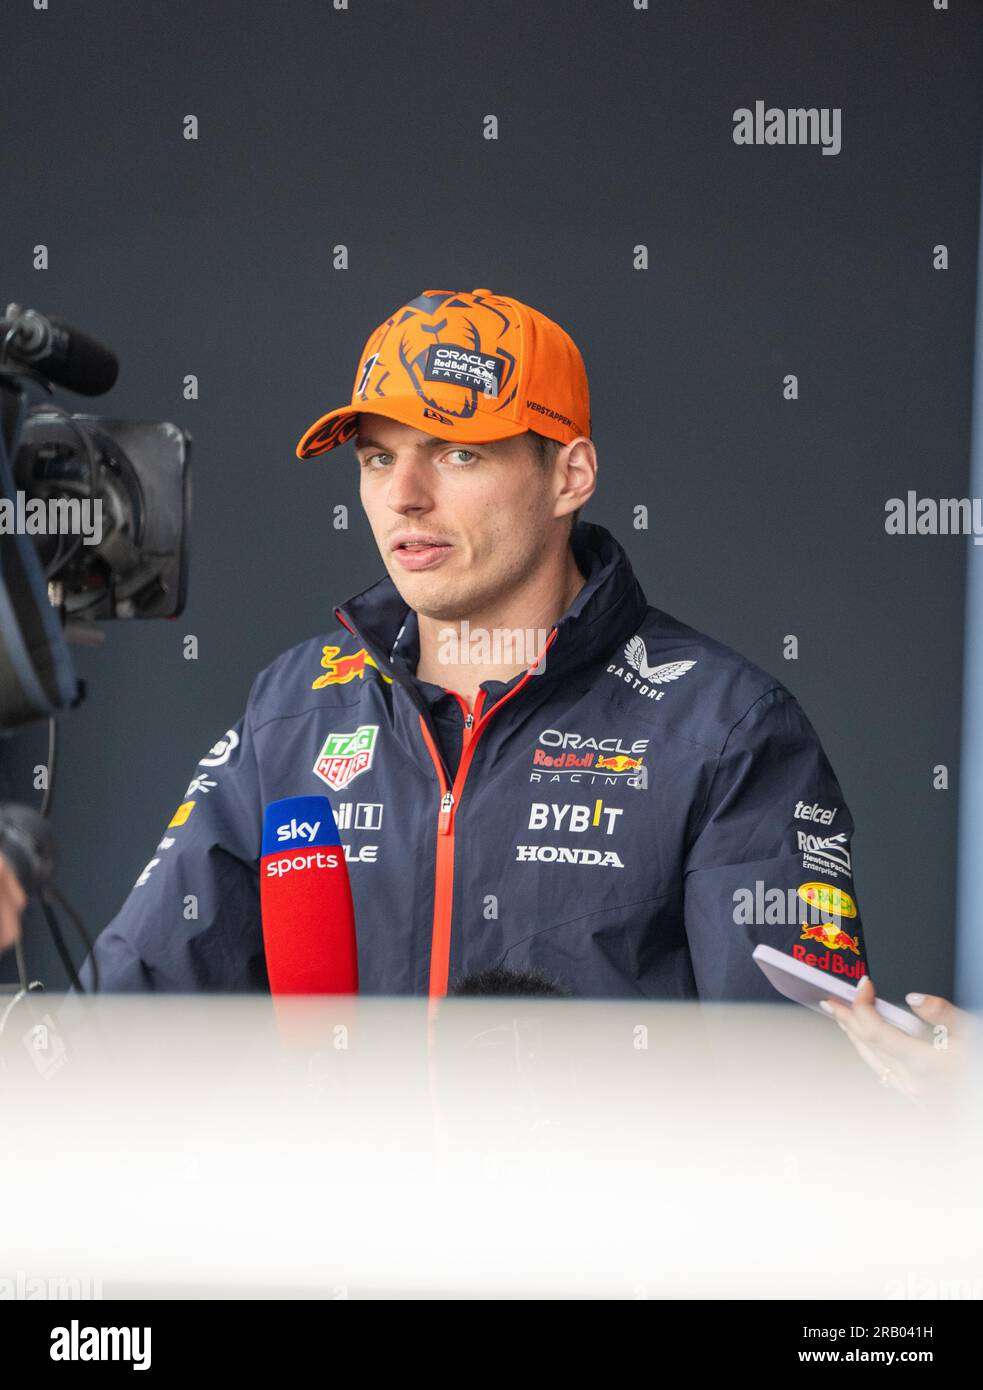 Silverstone, UK - Friday 7th July 2023 - FORMULA 1 ARAMCO BRITISH GRAND PRIX 2023 - Max Verstappen (Netherlands) - Oracle Red Bull Racing Stock Photo